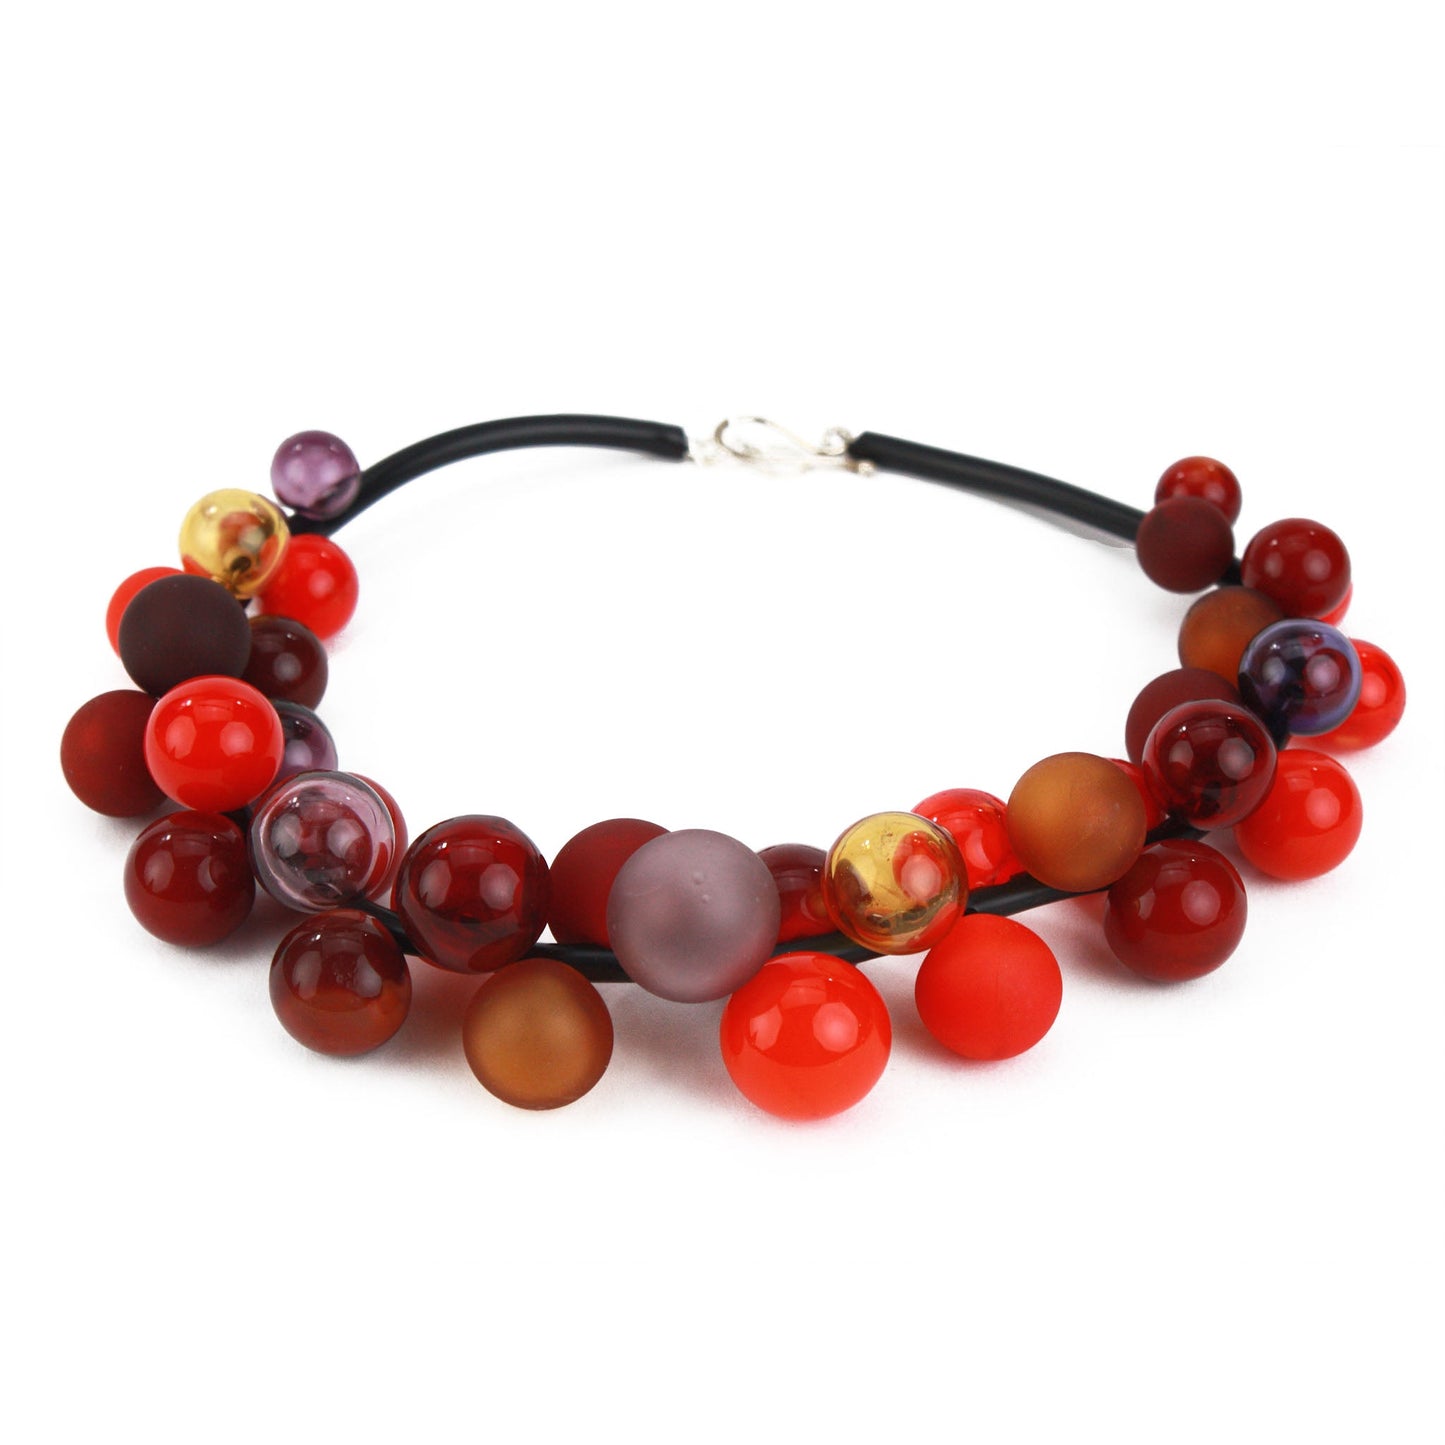 Bolla full cluster necklace - mixed shades of reds